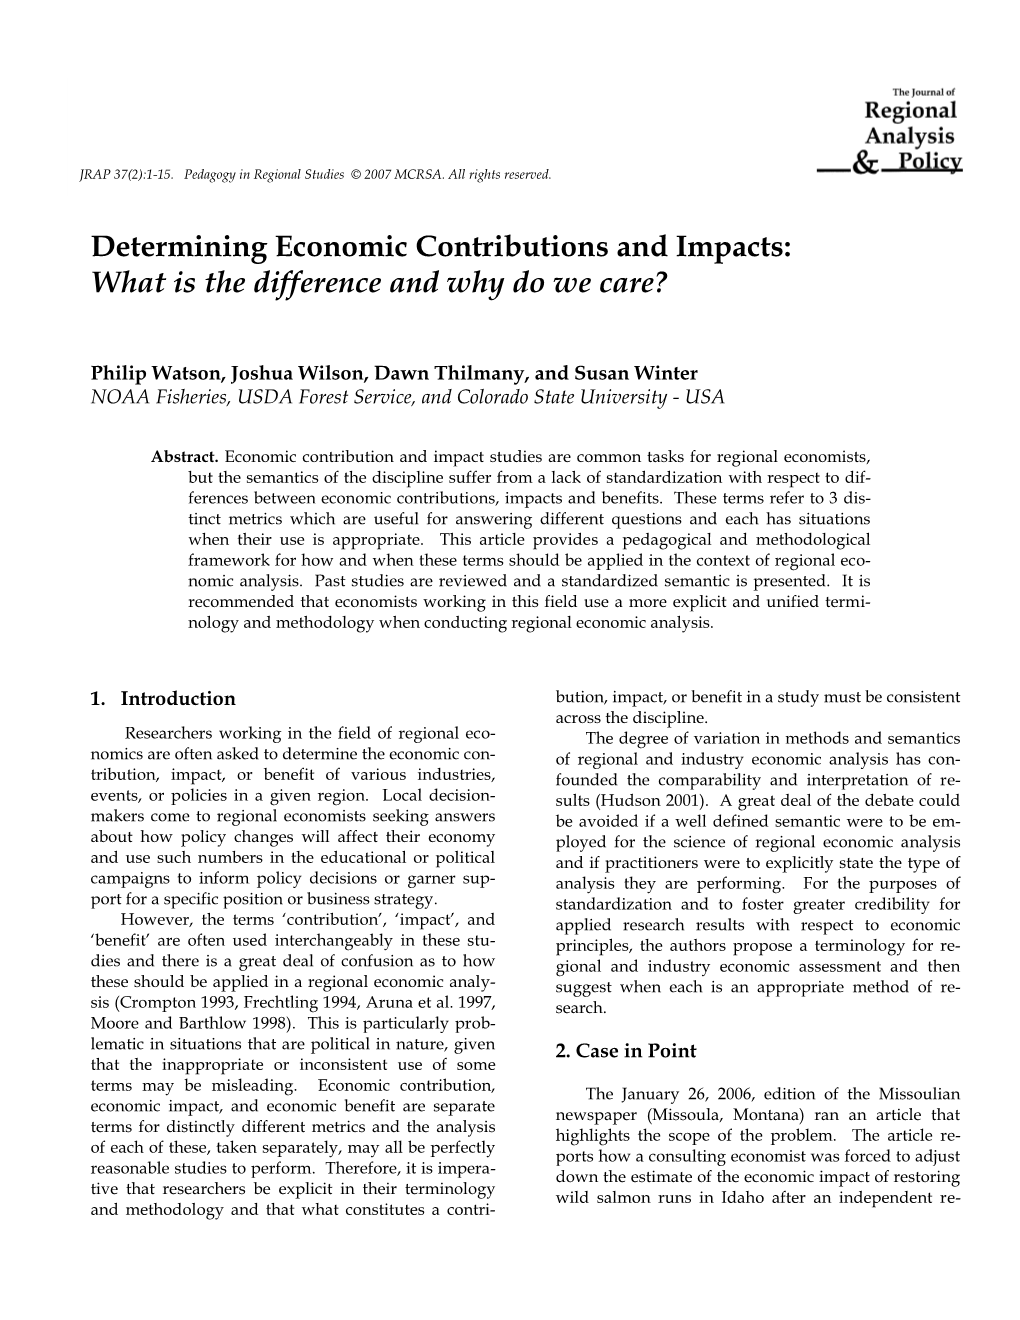 Determining Economic Contributions and Impacts: What Is the Difference and Why Do We Care?